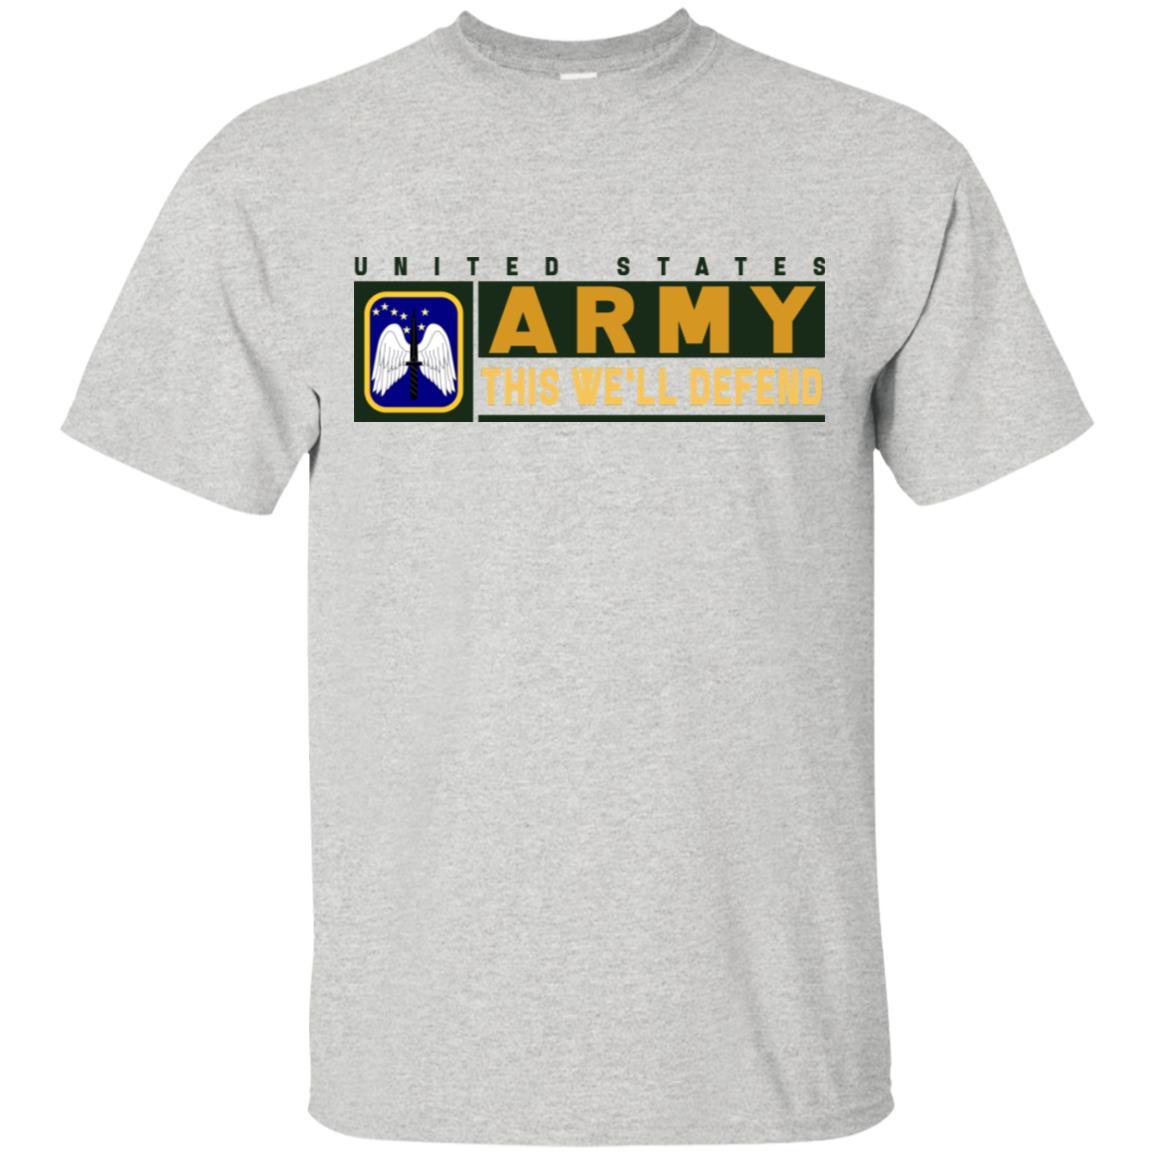 US Army 16TH AVIATION BRIGADE- This We'll Defend T-Shirt On Front For Men-TShirt-Army-Veterans Nation